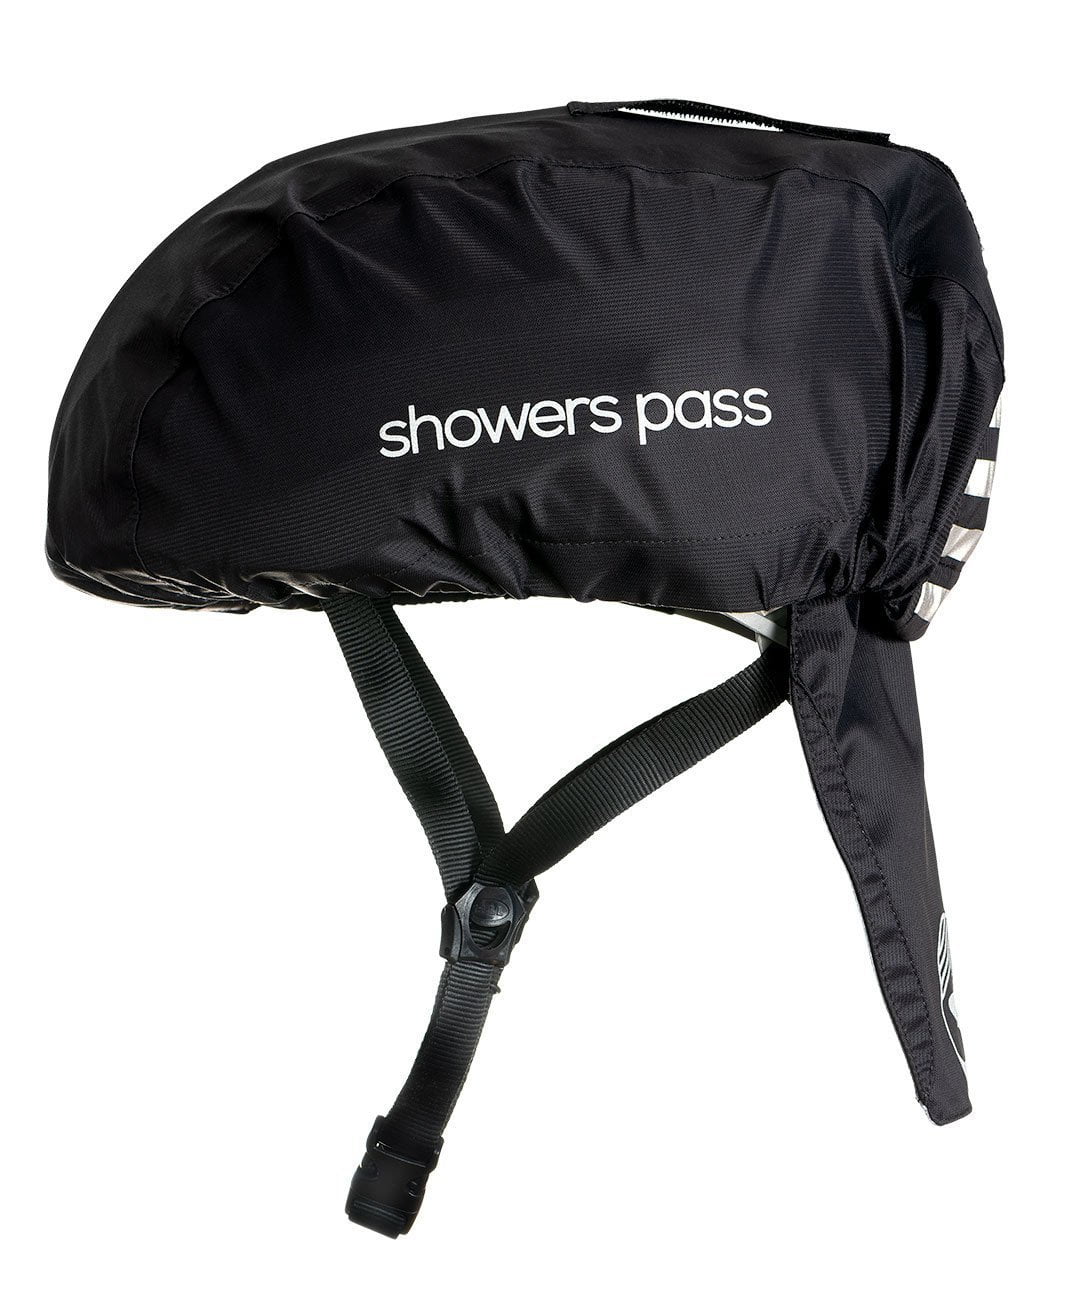 showers pass club shoe cover